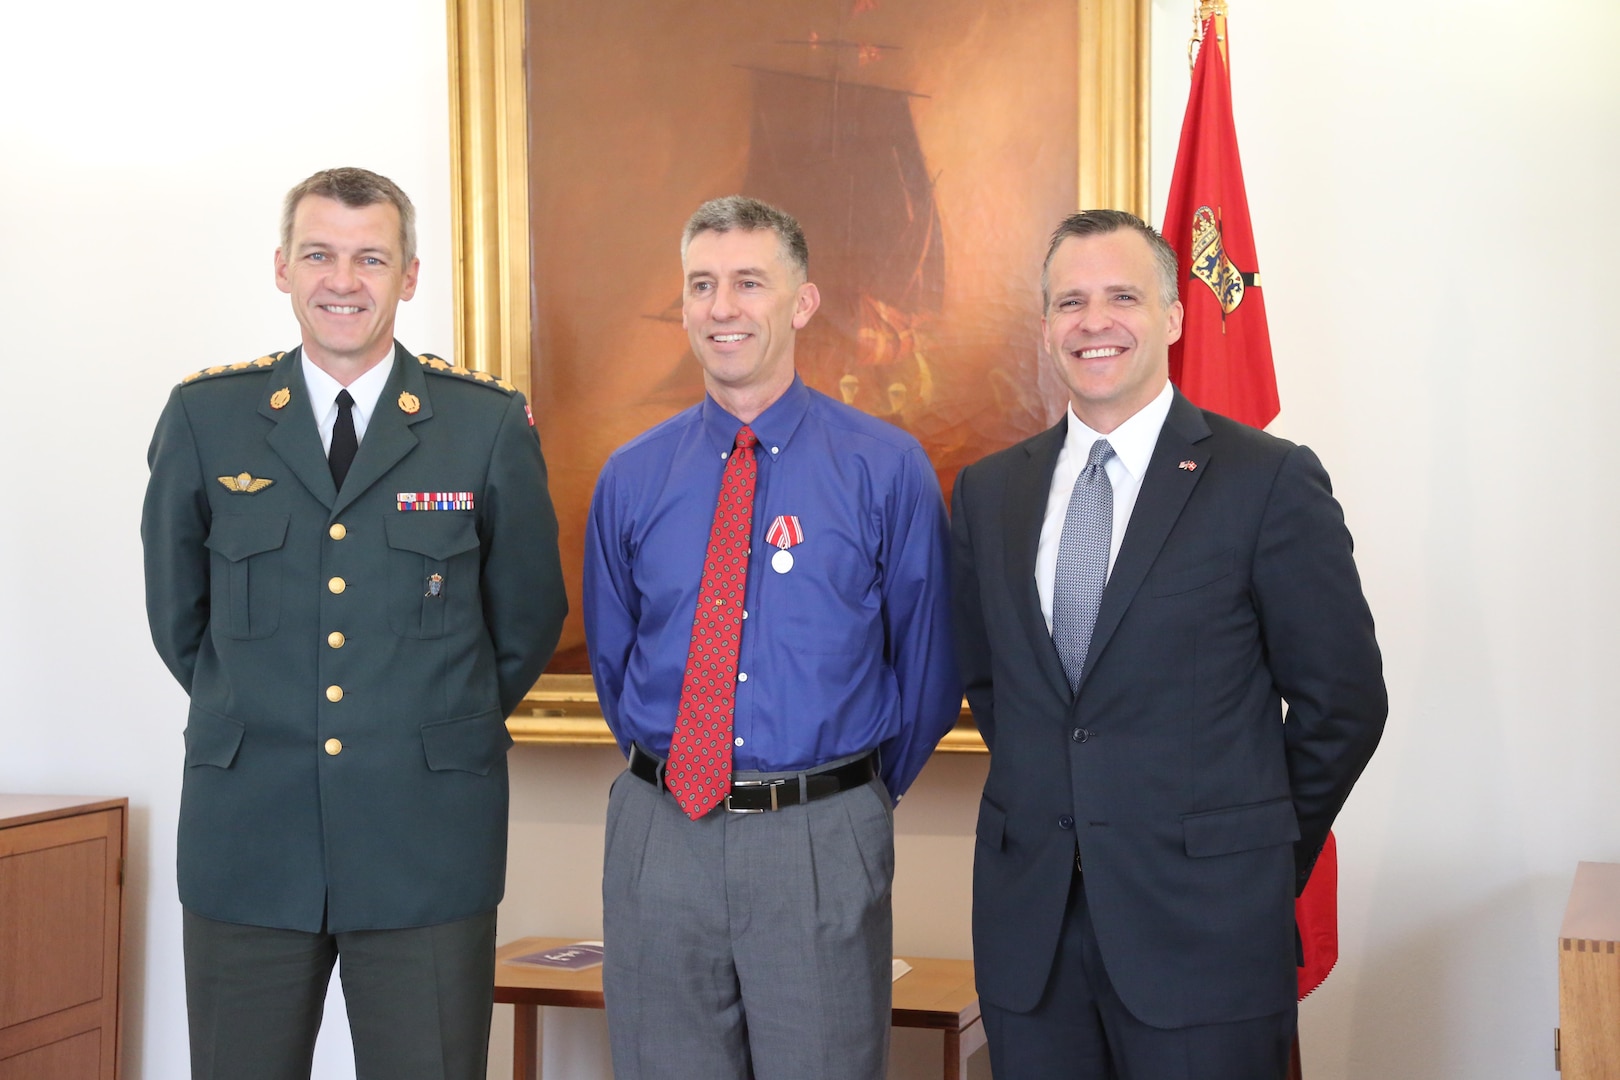 Capt. Bradley Grimm, center,Texas Army National Guard, receives the Danish Defense Medal for Special Meritorious Efforts by Danish Defense Gen. Peter Bartram, left, and American ambassador to Denmark Rufus Gifford, right, at a ceremony held in Denmark, April 19, 2016.  Grimm was instrumental in foiling a terrorist plot to bomb a Danish school and assisted Danish security forces in making an arrest. (Danish Military photo by Sune Wadskjær/Released)